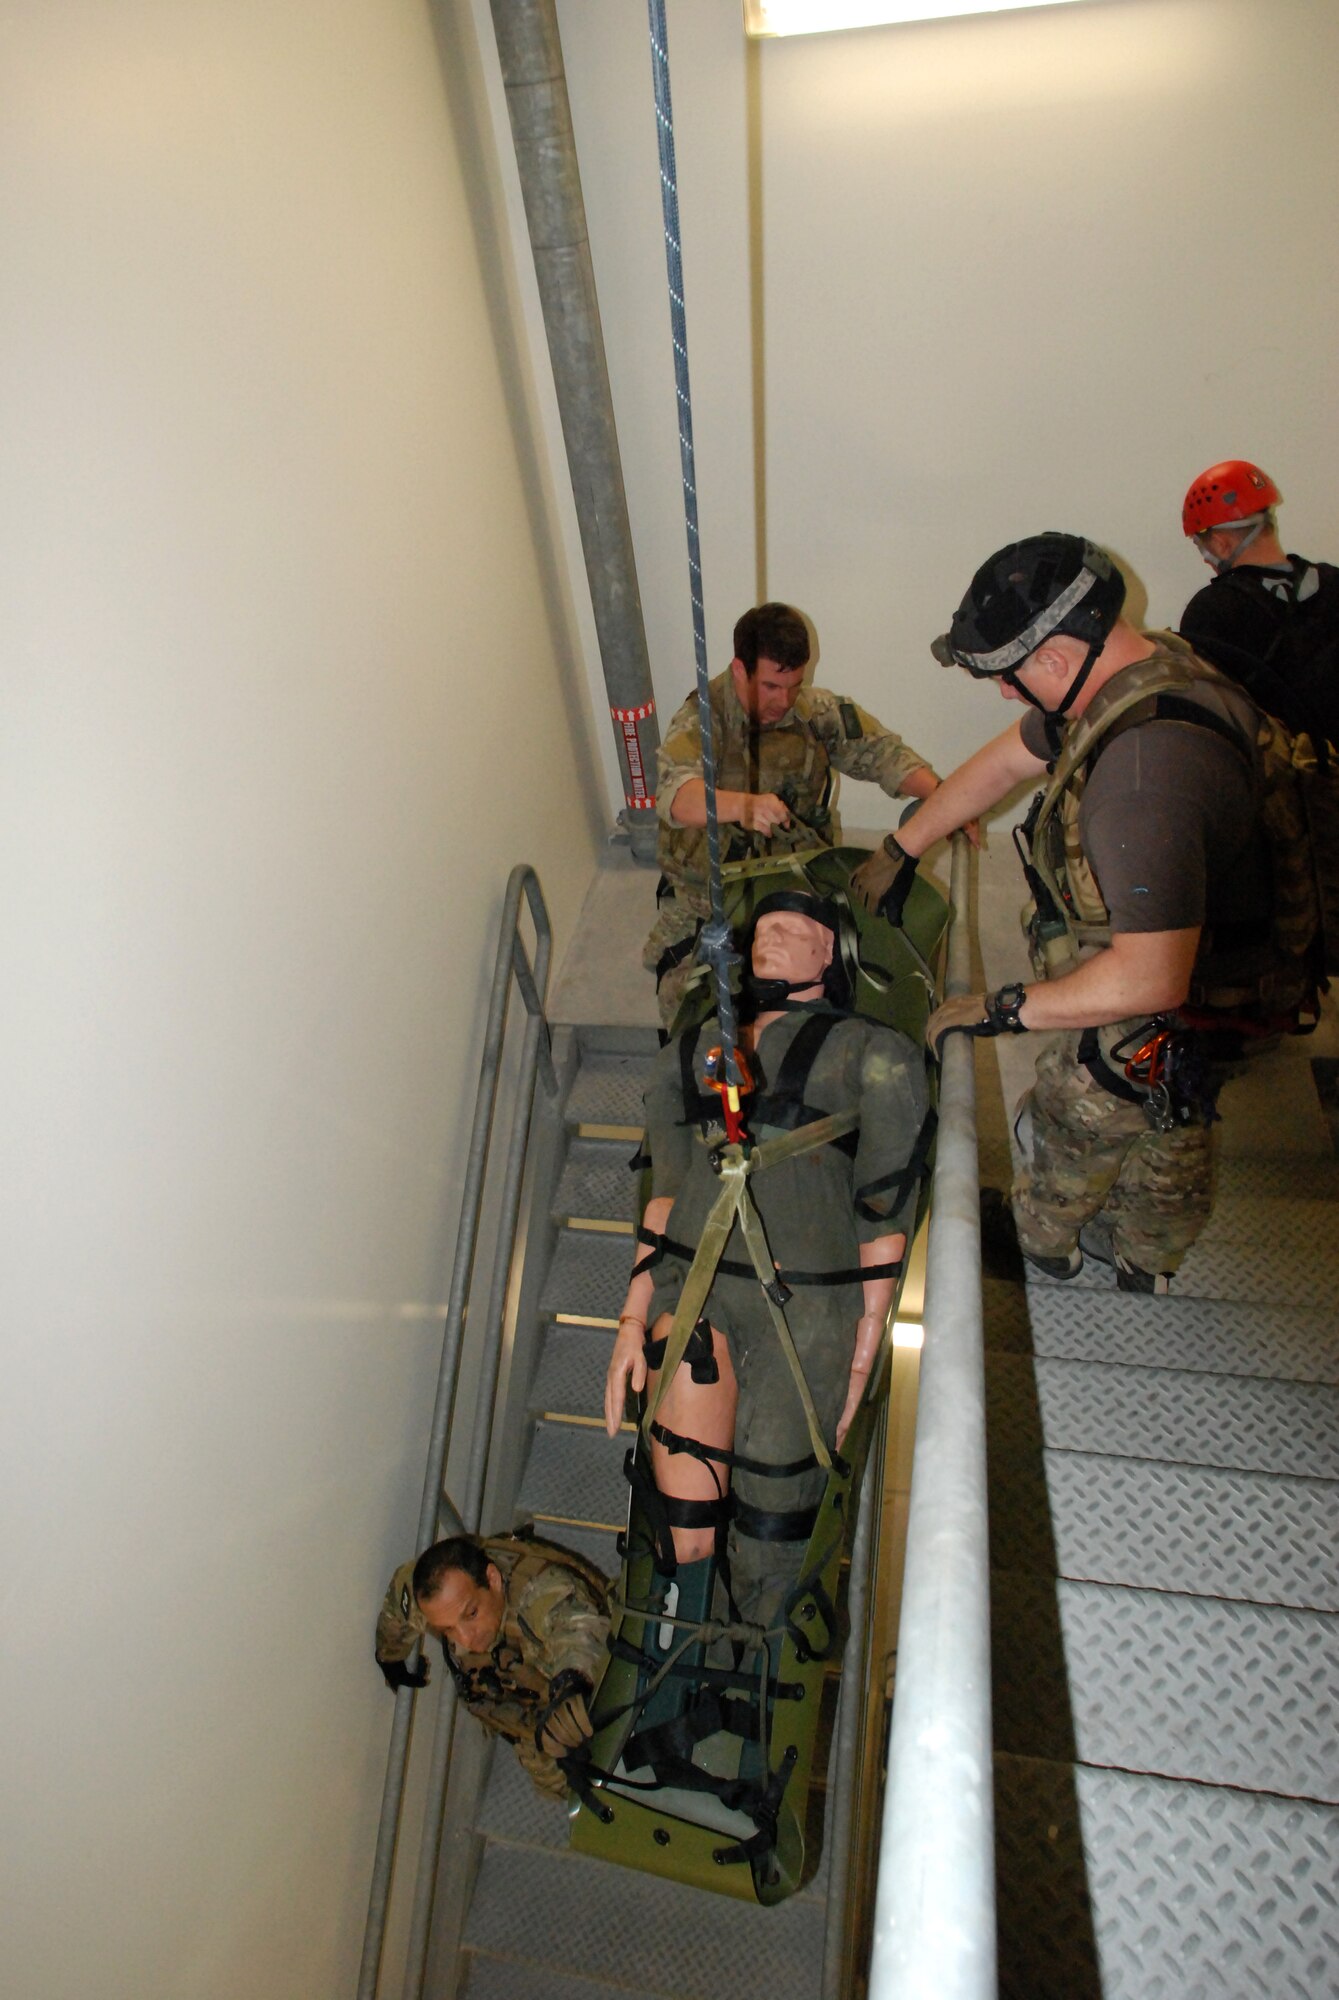 CAPE CANAVERAL AIR FORCE STATION, Fla. - Master Sgt. Ken Surry, Capt. James Sluder and Master Sgt. Robert Smith, U.S. Air Force Reserve pararescuemen from the 920th Rescue Wing, Cocoa Beach, Fla., practice their rescue skills in a narrow stairwell at an empty Titan rocket complex here. The training, by ROCO Rescue, is high-angle, high-altitude and confined space rescue refresher for the PJs and combat rescue officers.   (U.S. Air Force photo/Staff Sgt. Leslie Kraushaar)